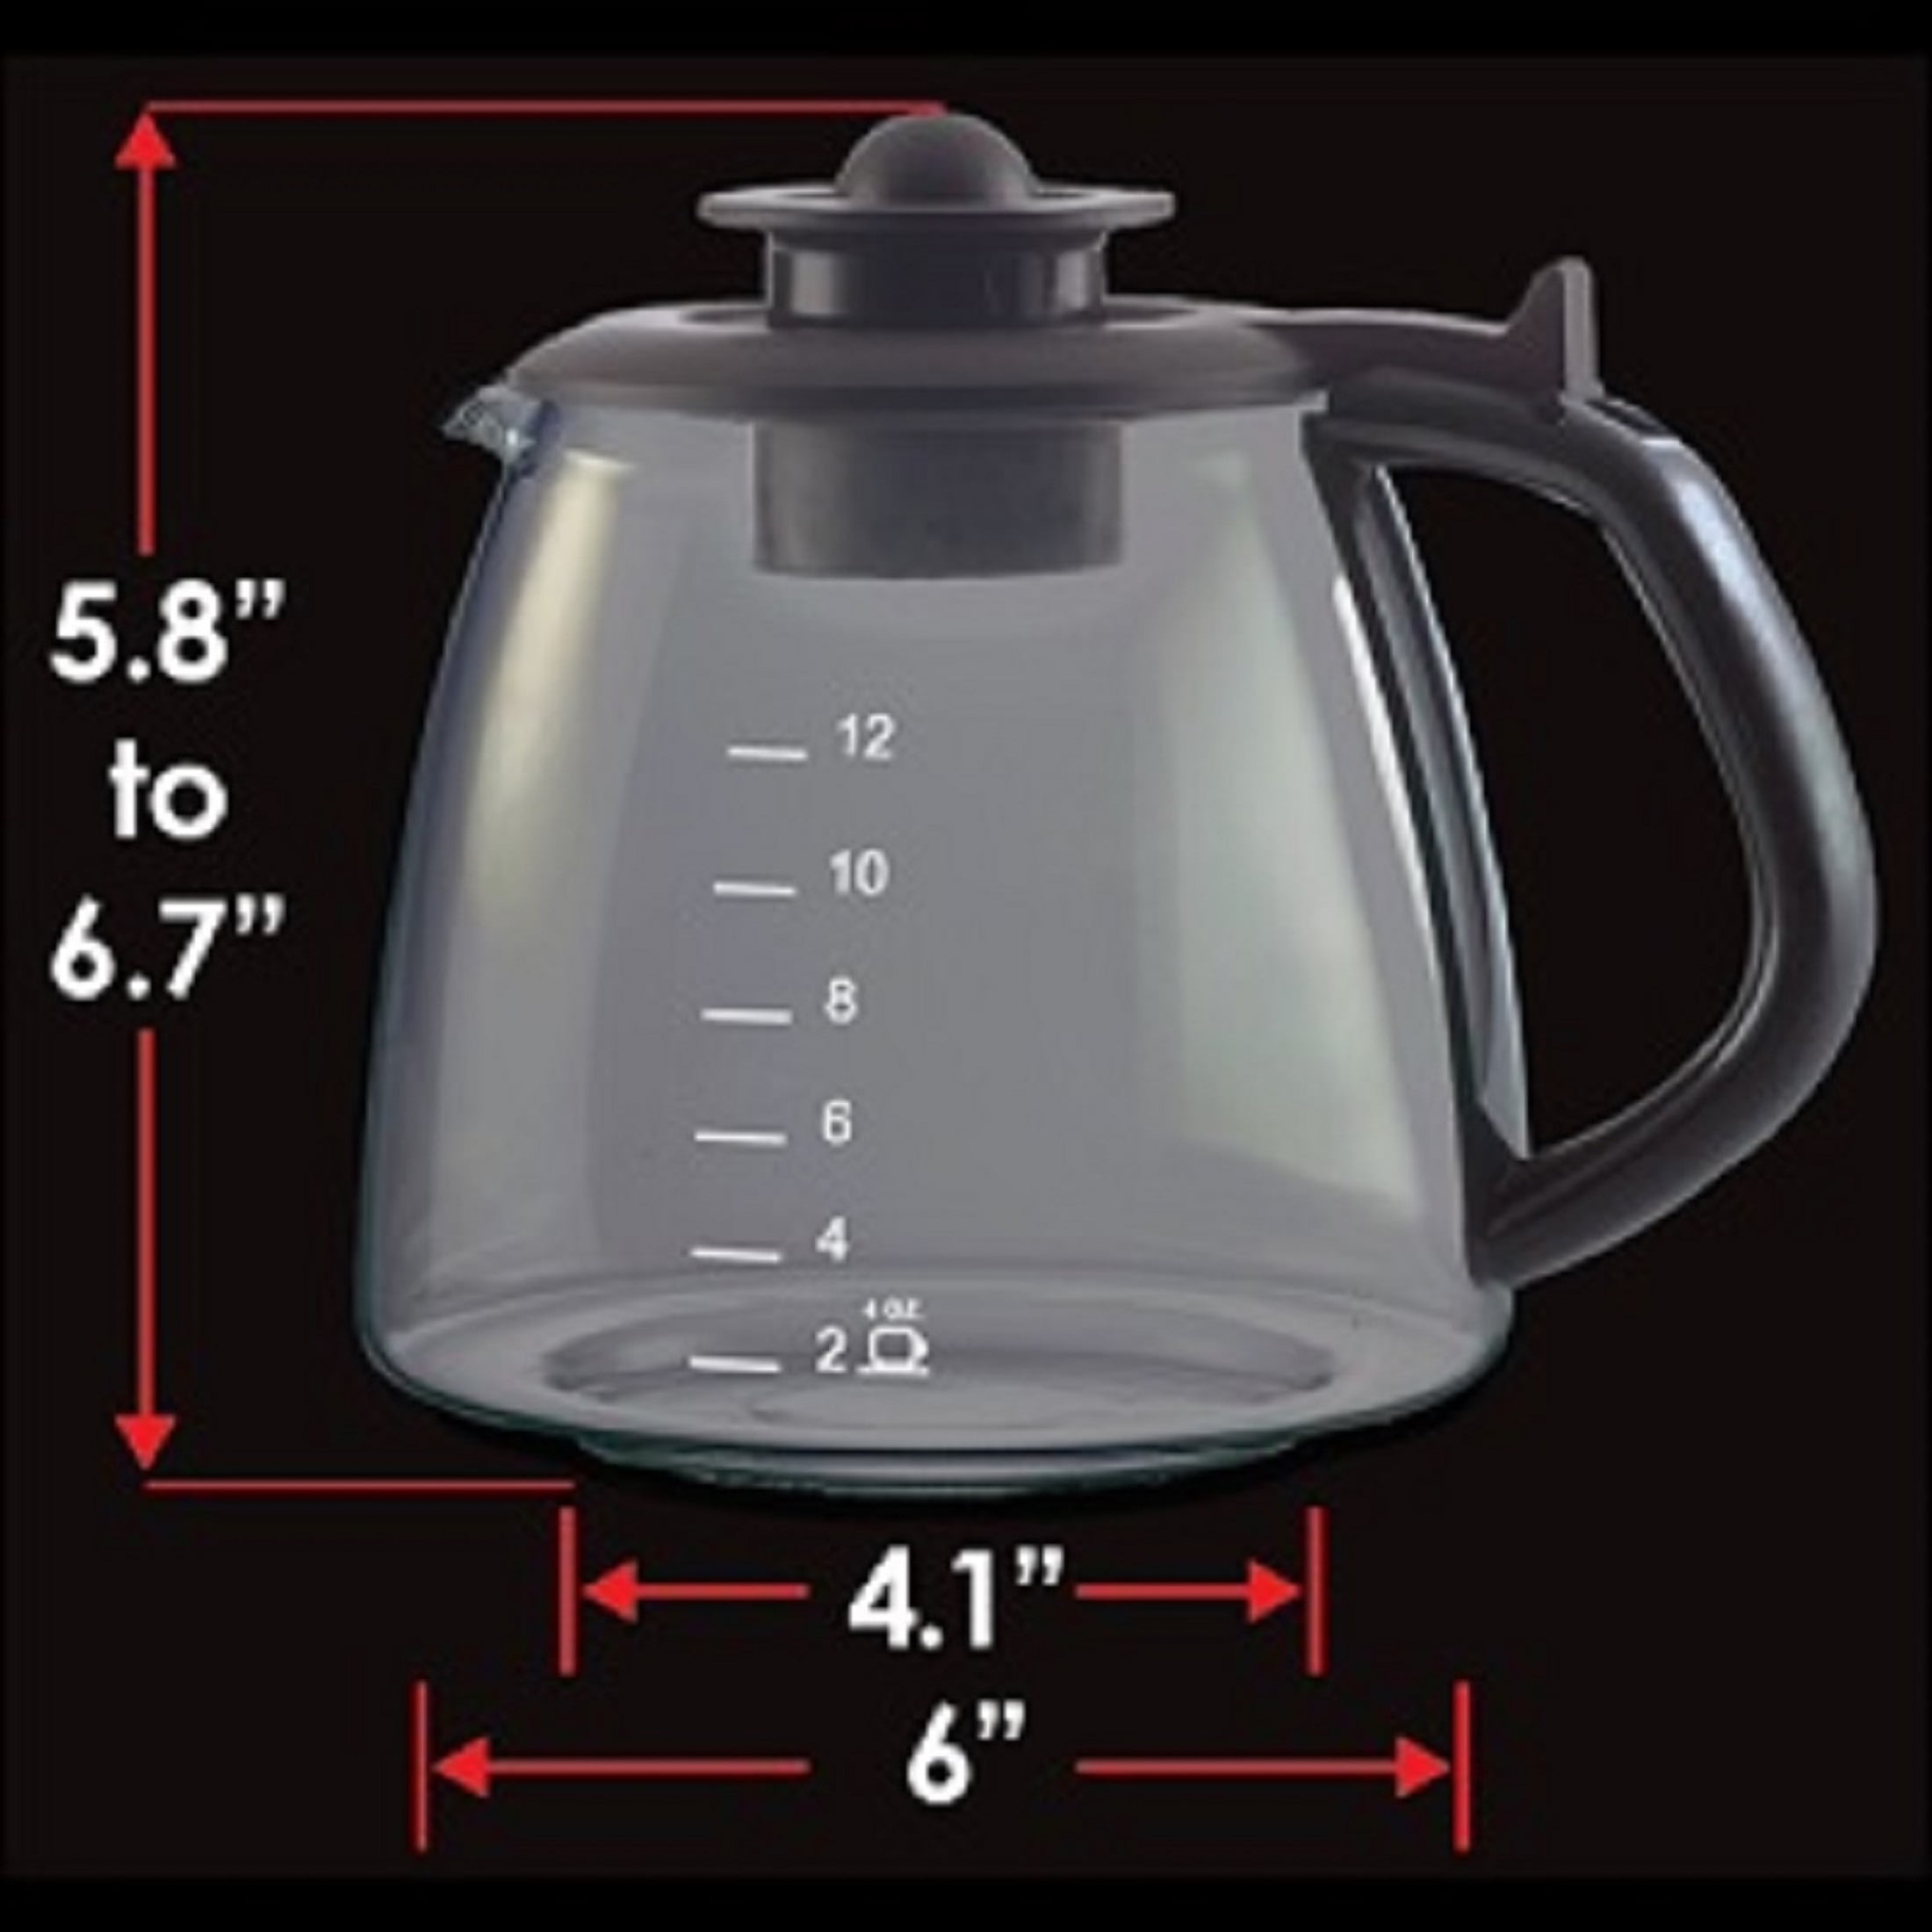 12-cup glass carafe for SG220 (Model #427) & 12-Cup Coffee Maker